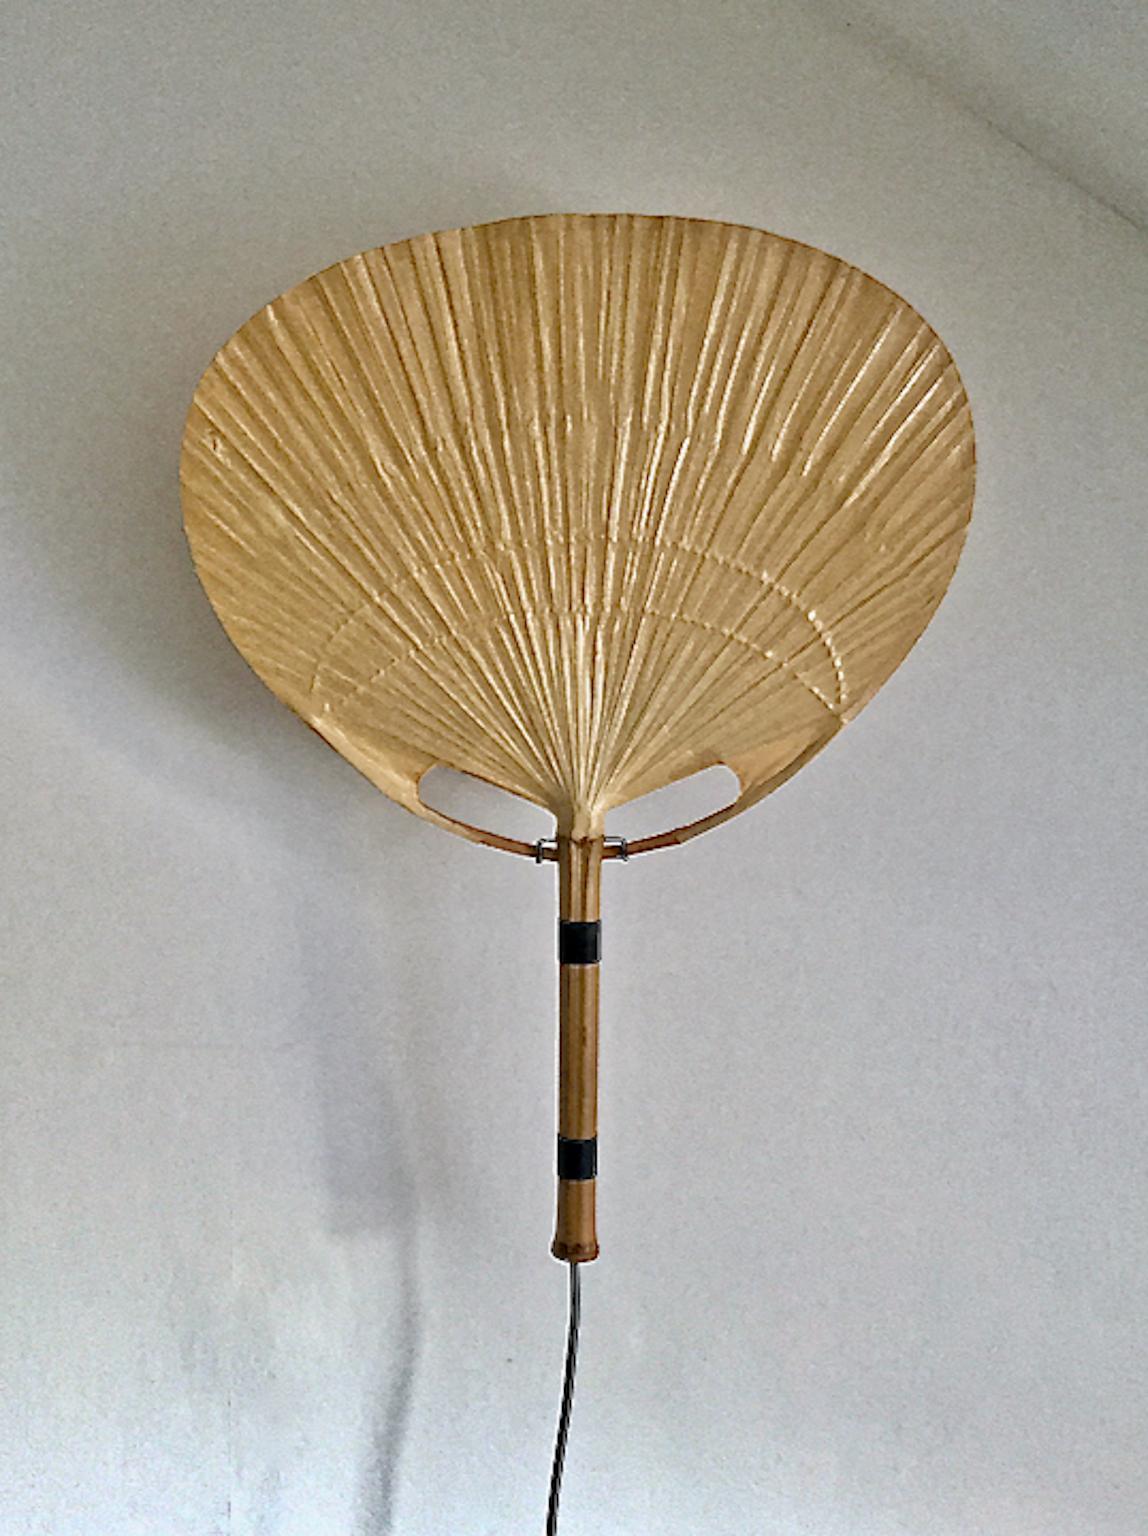 An “Uchiwa” wall light by Ingo Maurer (1932 to 2019) for M design, Germany, 1970s. Smaller wall model (46cm wide).

Beautiful understated design composed of rice paper and bamboo, which gives a beautifully warm and diffuse glow. Unusual to see in